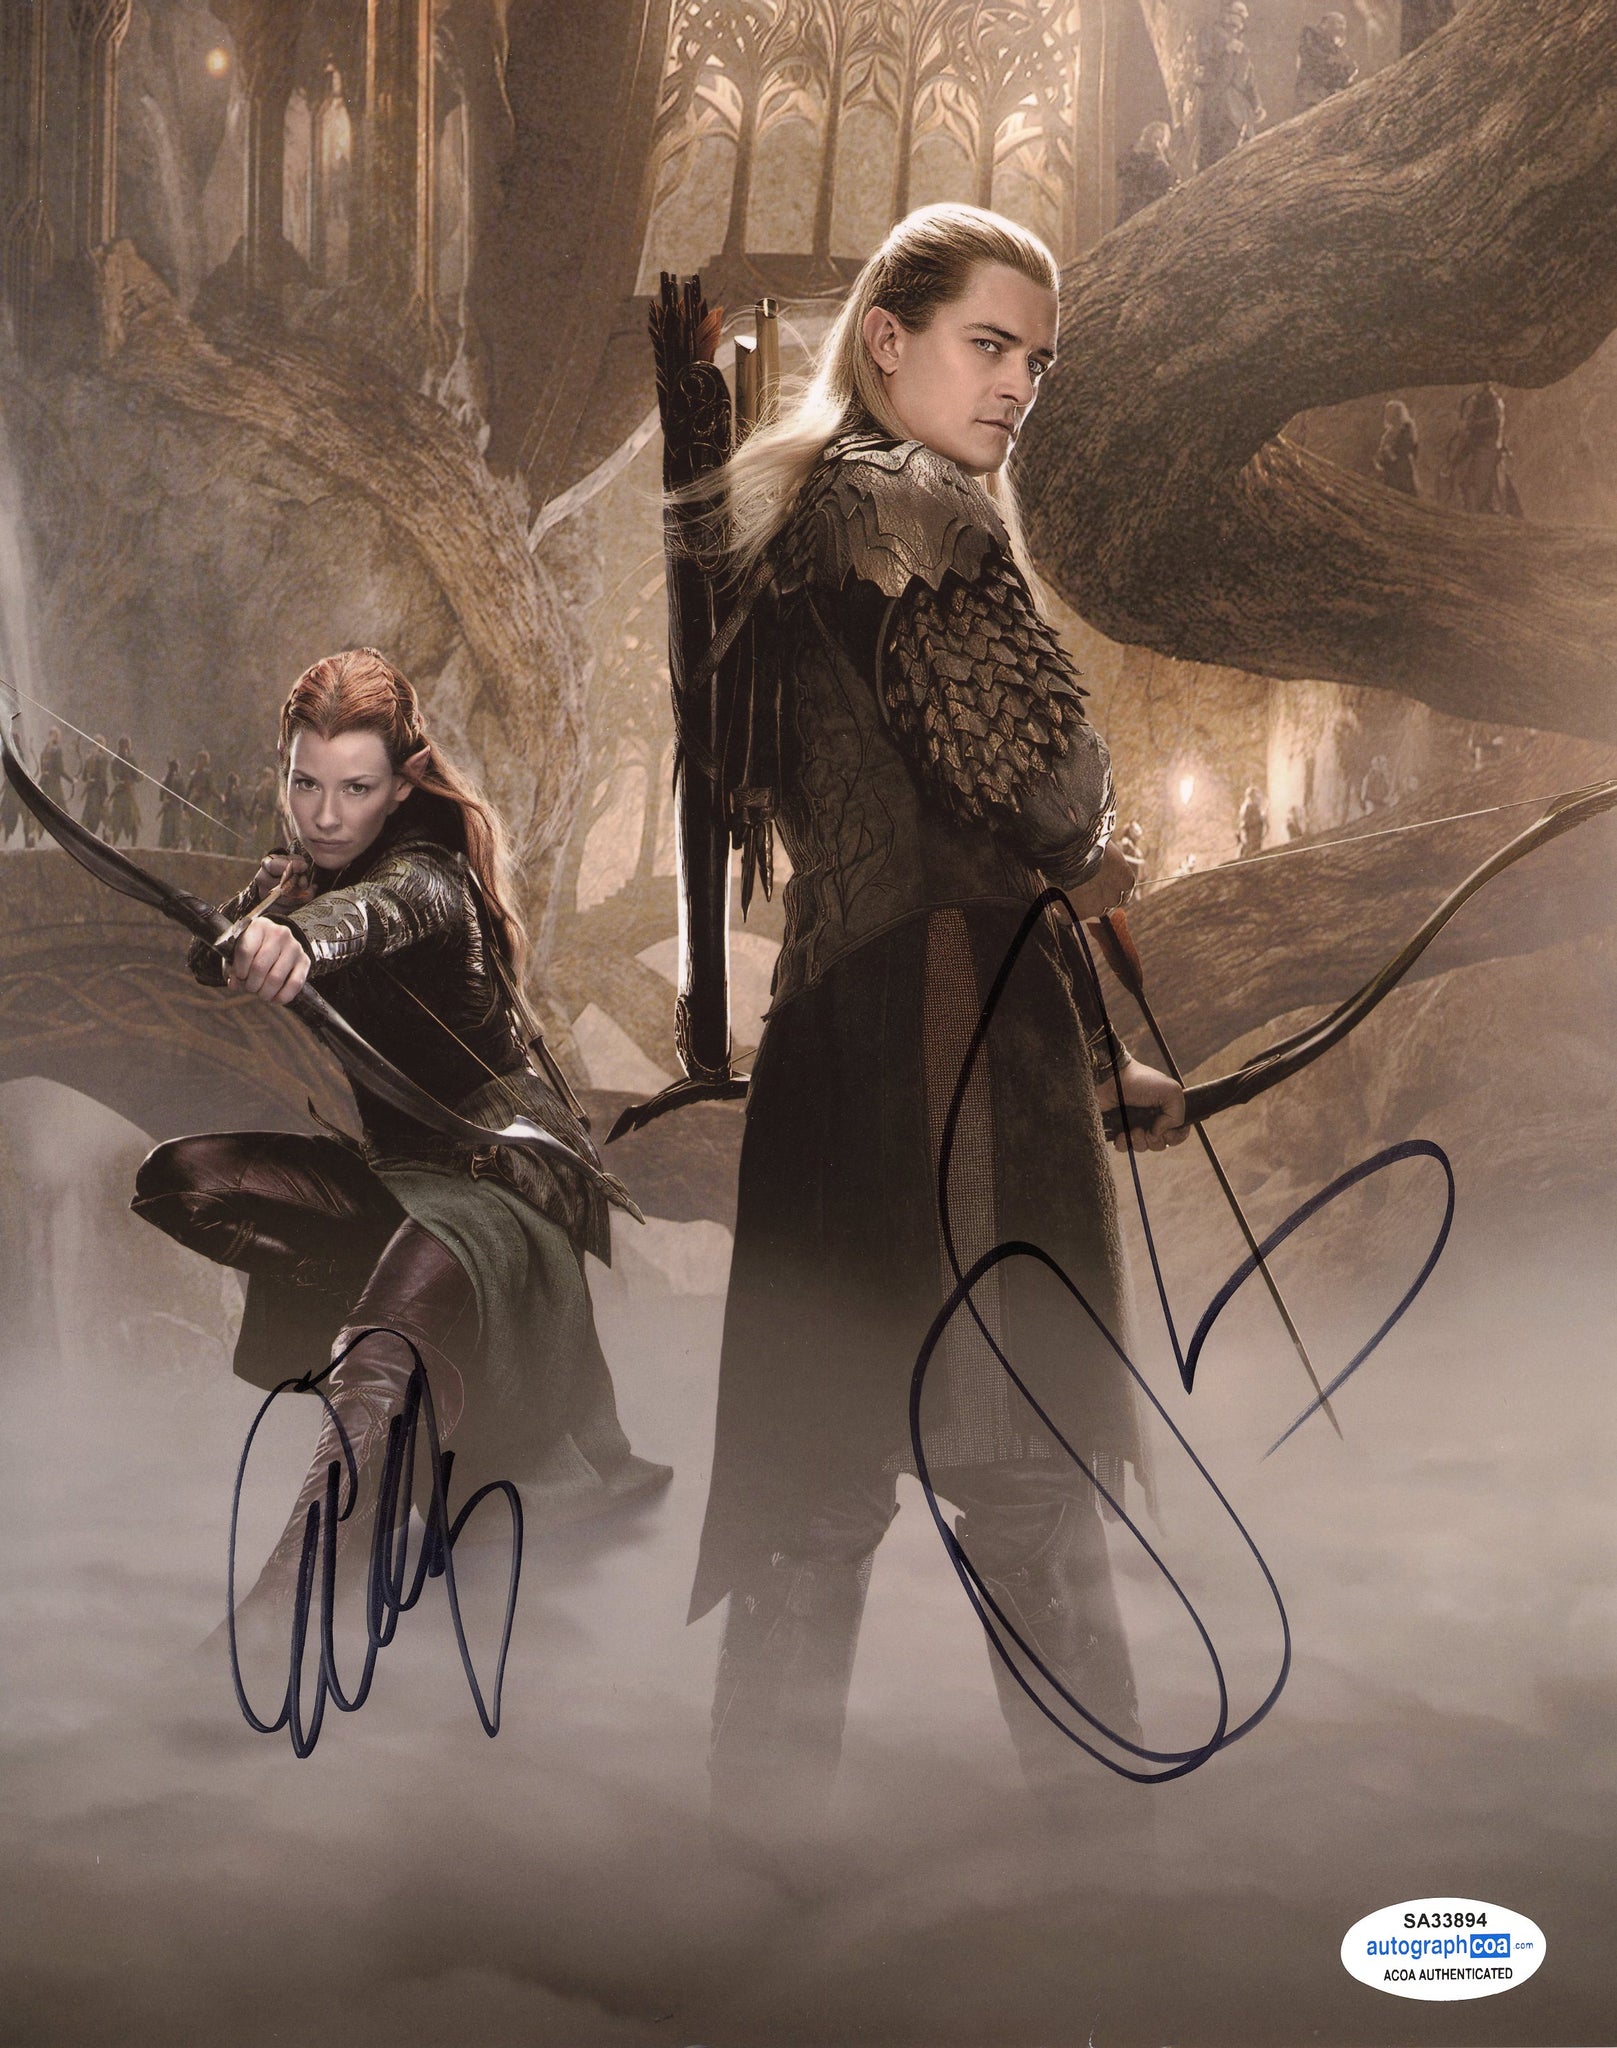 Evangeline Lilly & Orlando Bloom The Hobbit Signed Autograph 8x10 Photo ACOA - Outlaw Hobbies Authentic Autographs